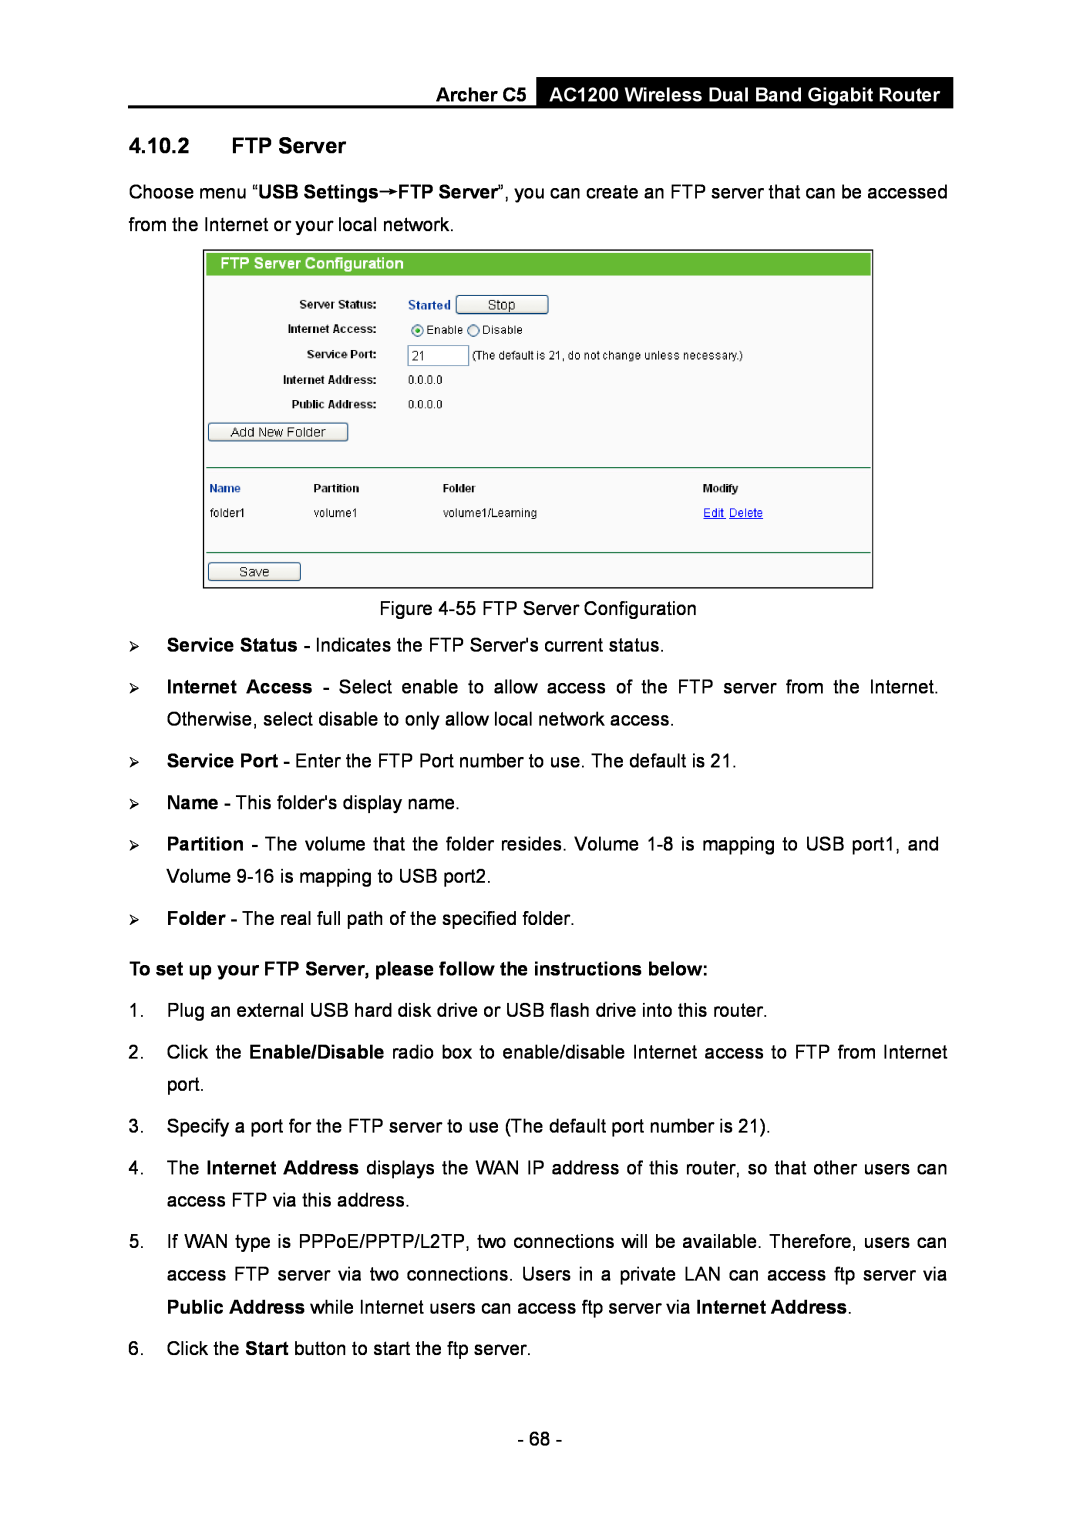 TP-Link AC1200 manual To set up your FTP Server, please follow the instructions below 